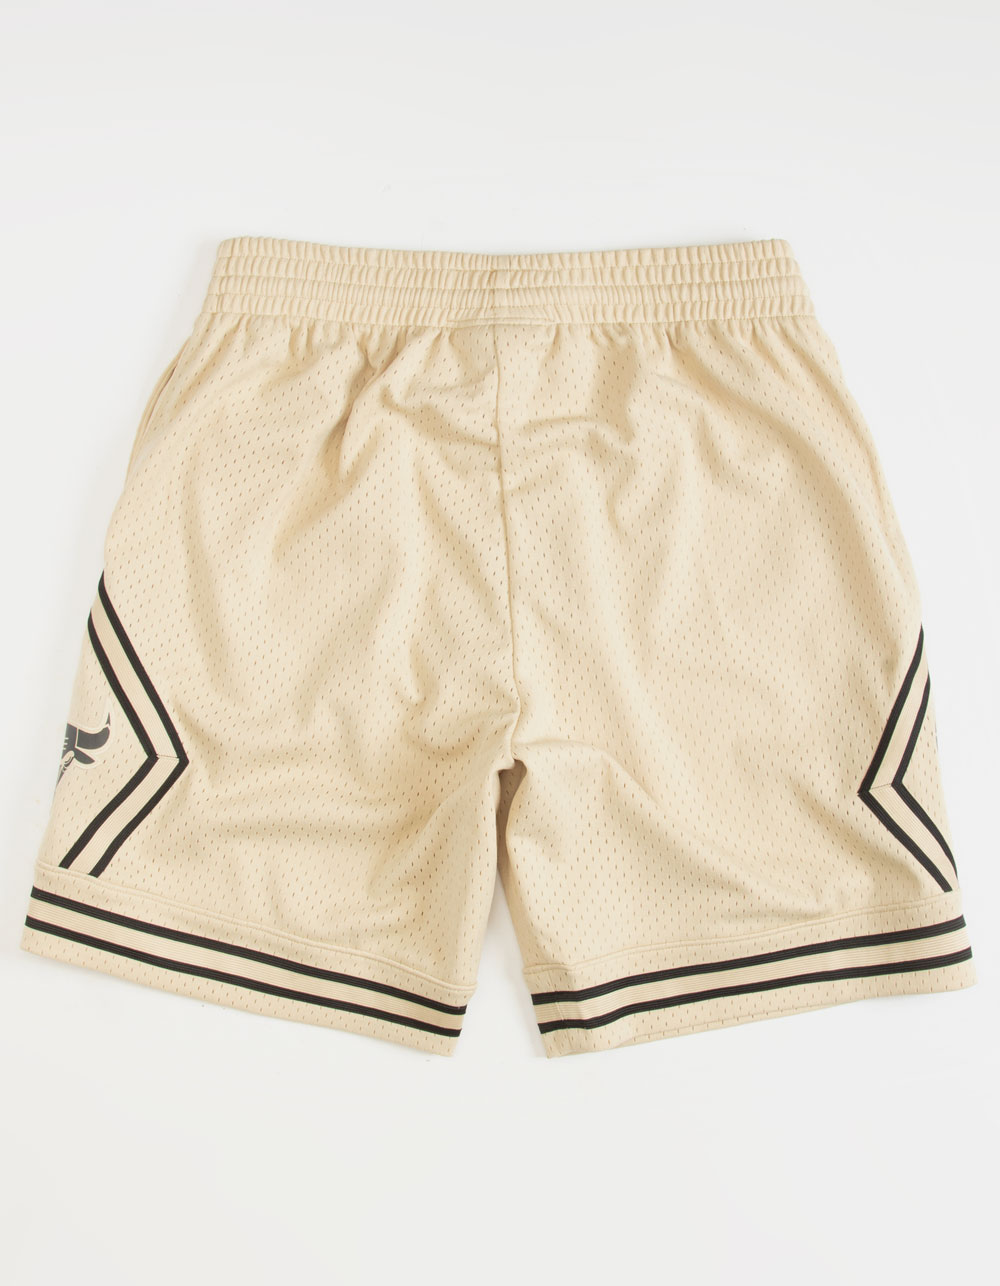 Mitchell & Ness Chicago Bulls Gold Collection Swingman Shorts for